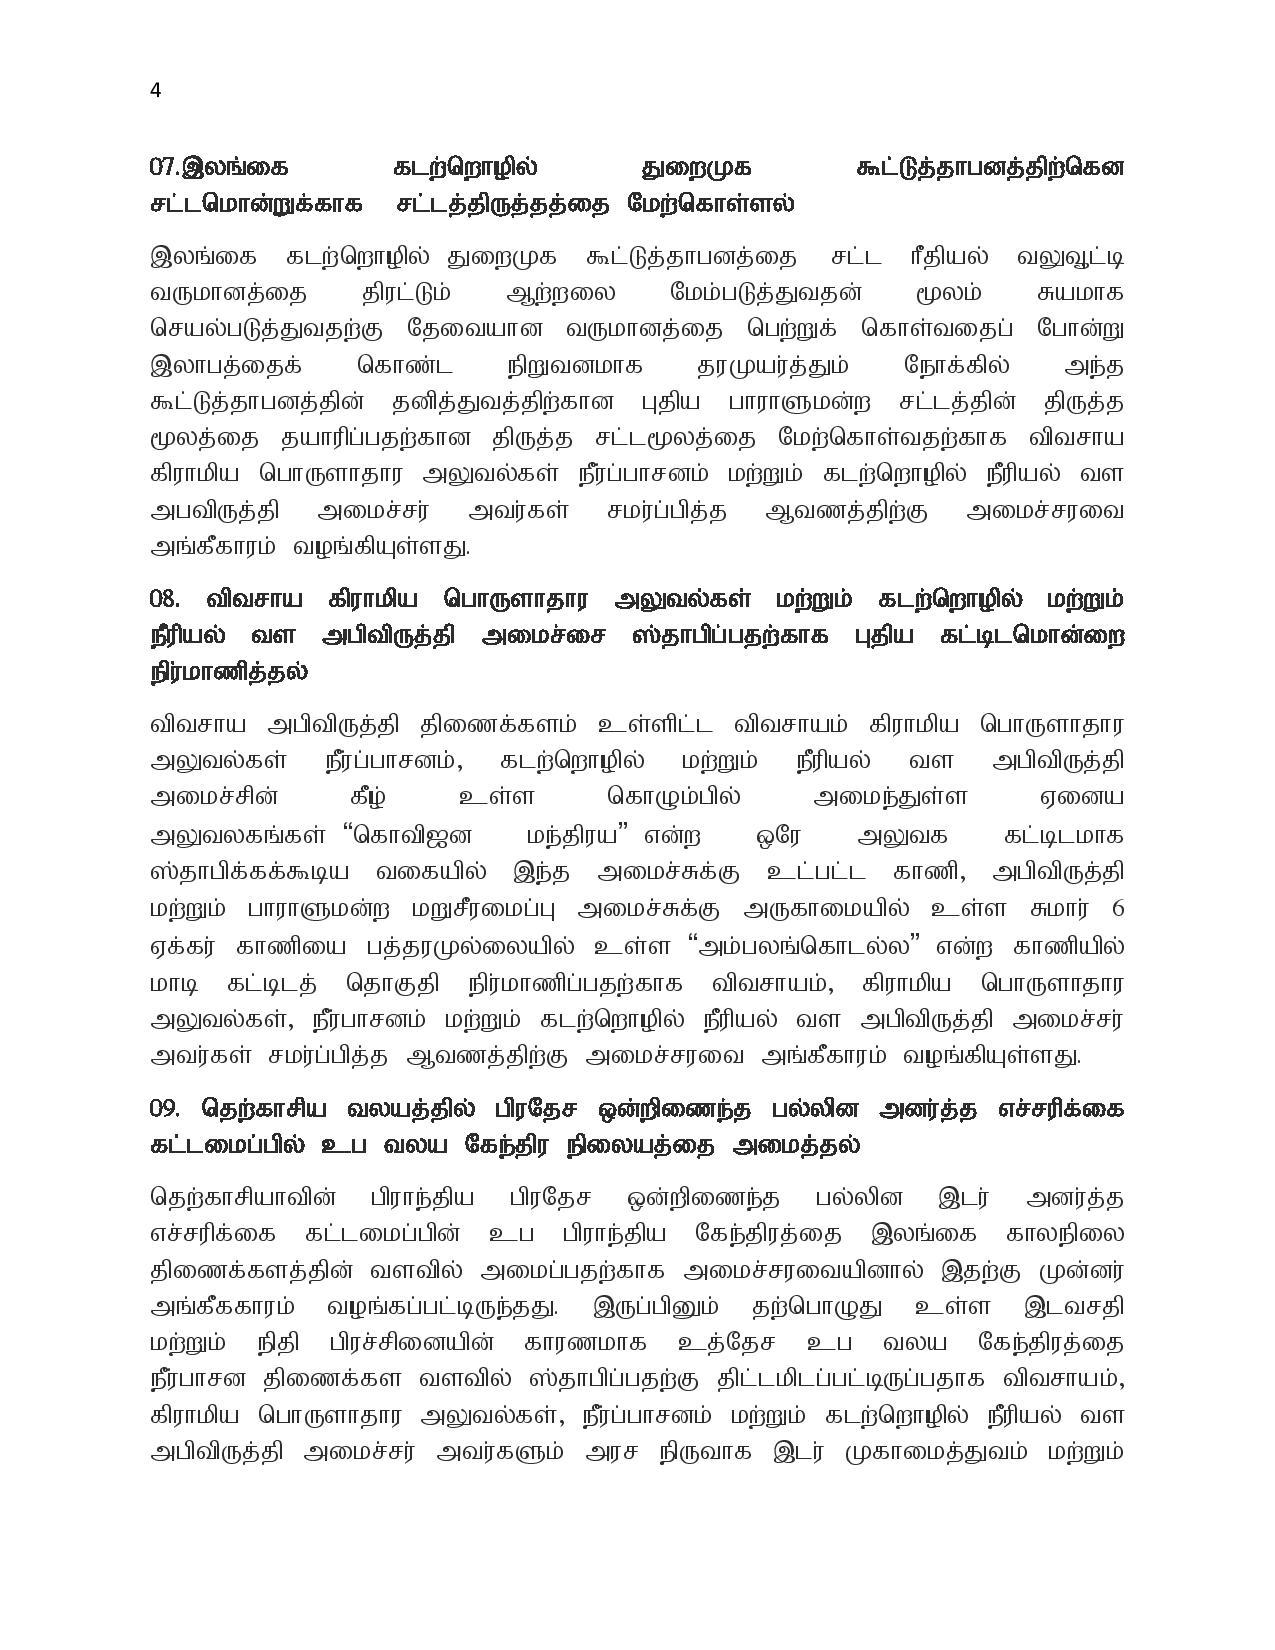 24.09.2019 cabinet page 004